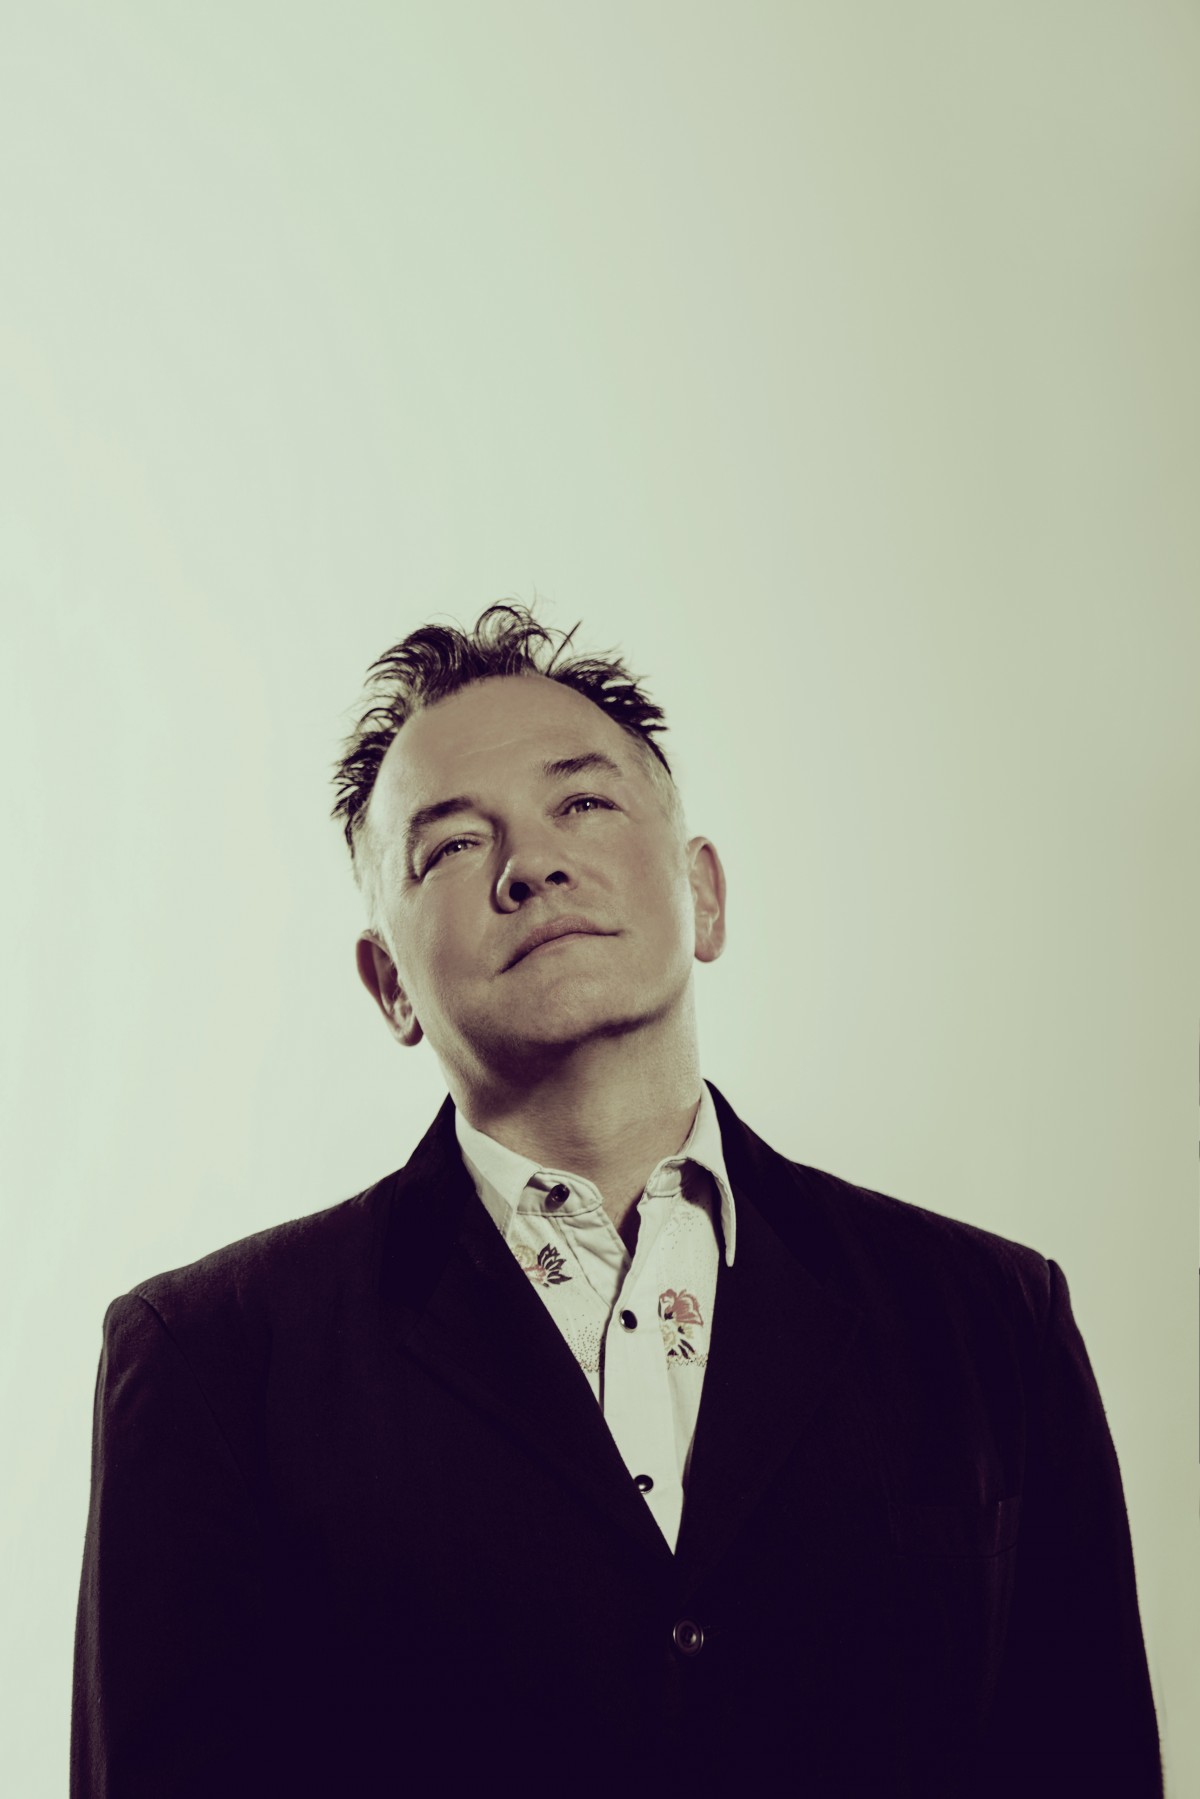 Enter for your chance to laugh the night away at Stewart Lee's awesome comedy stand-up show!